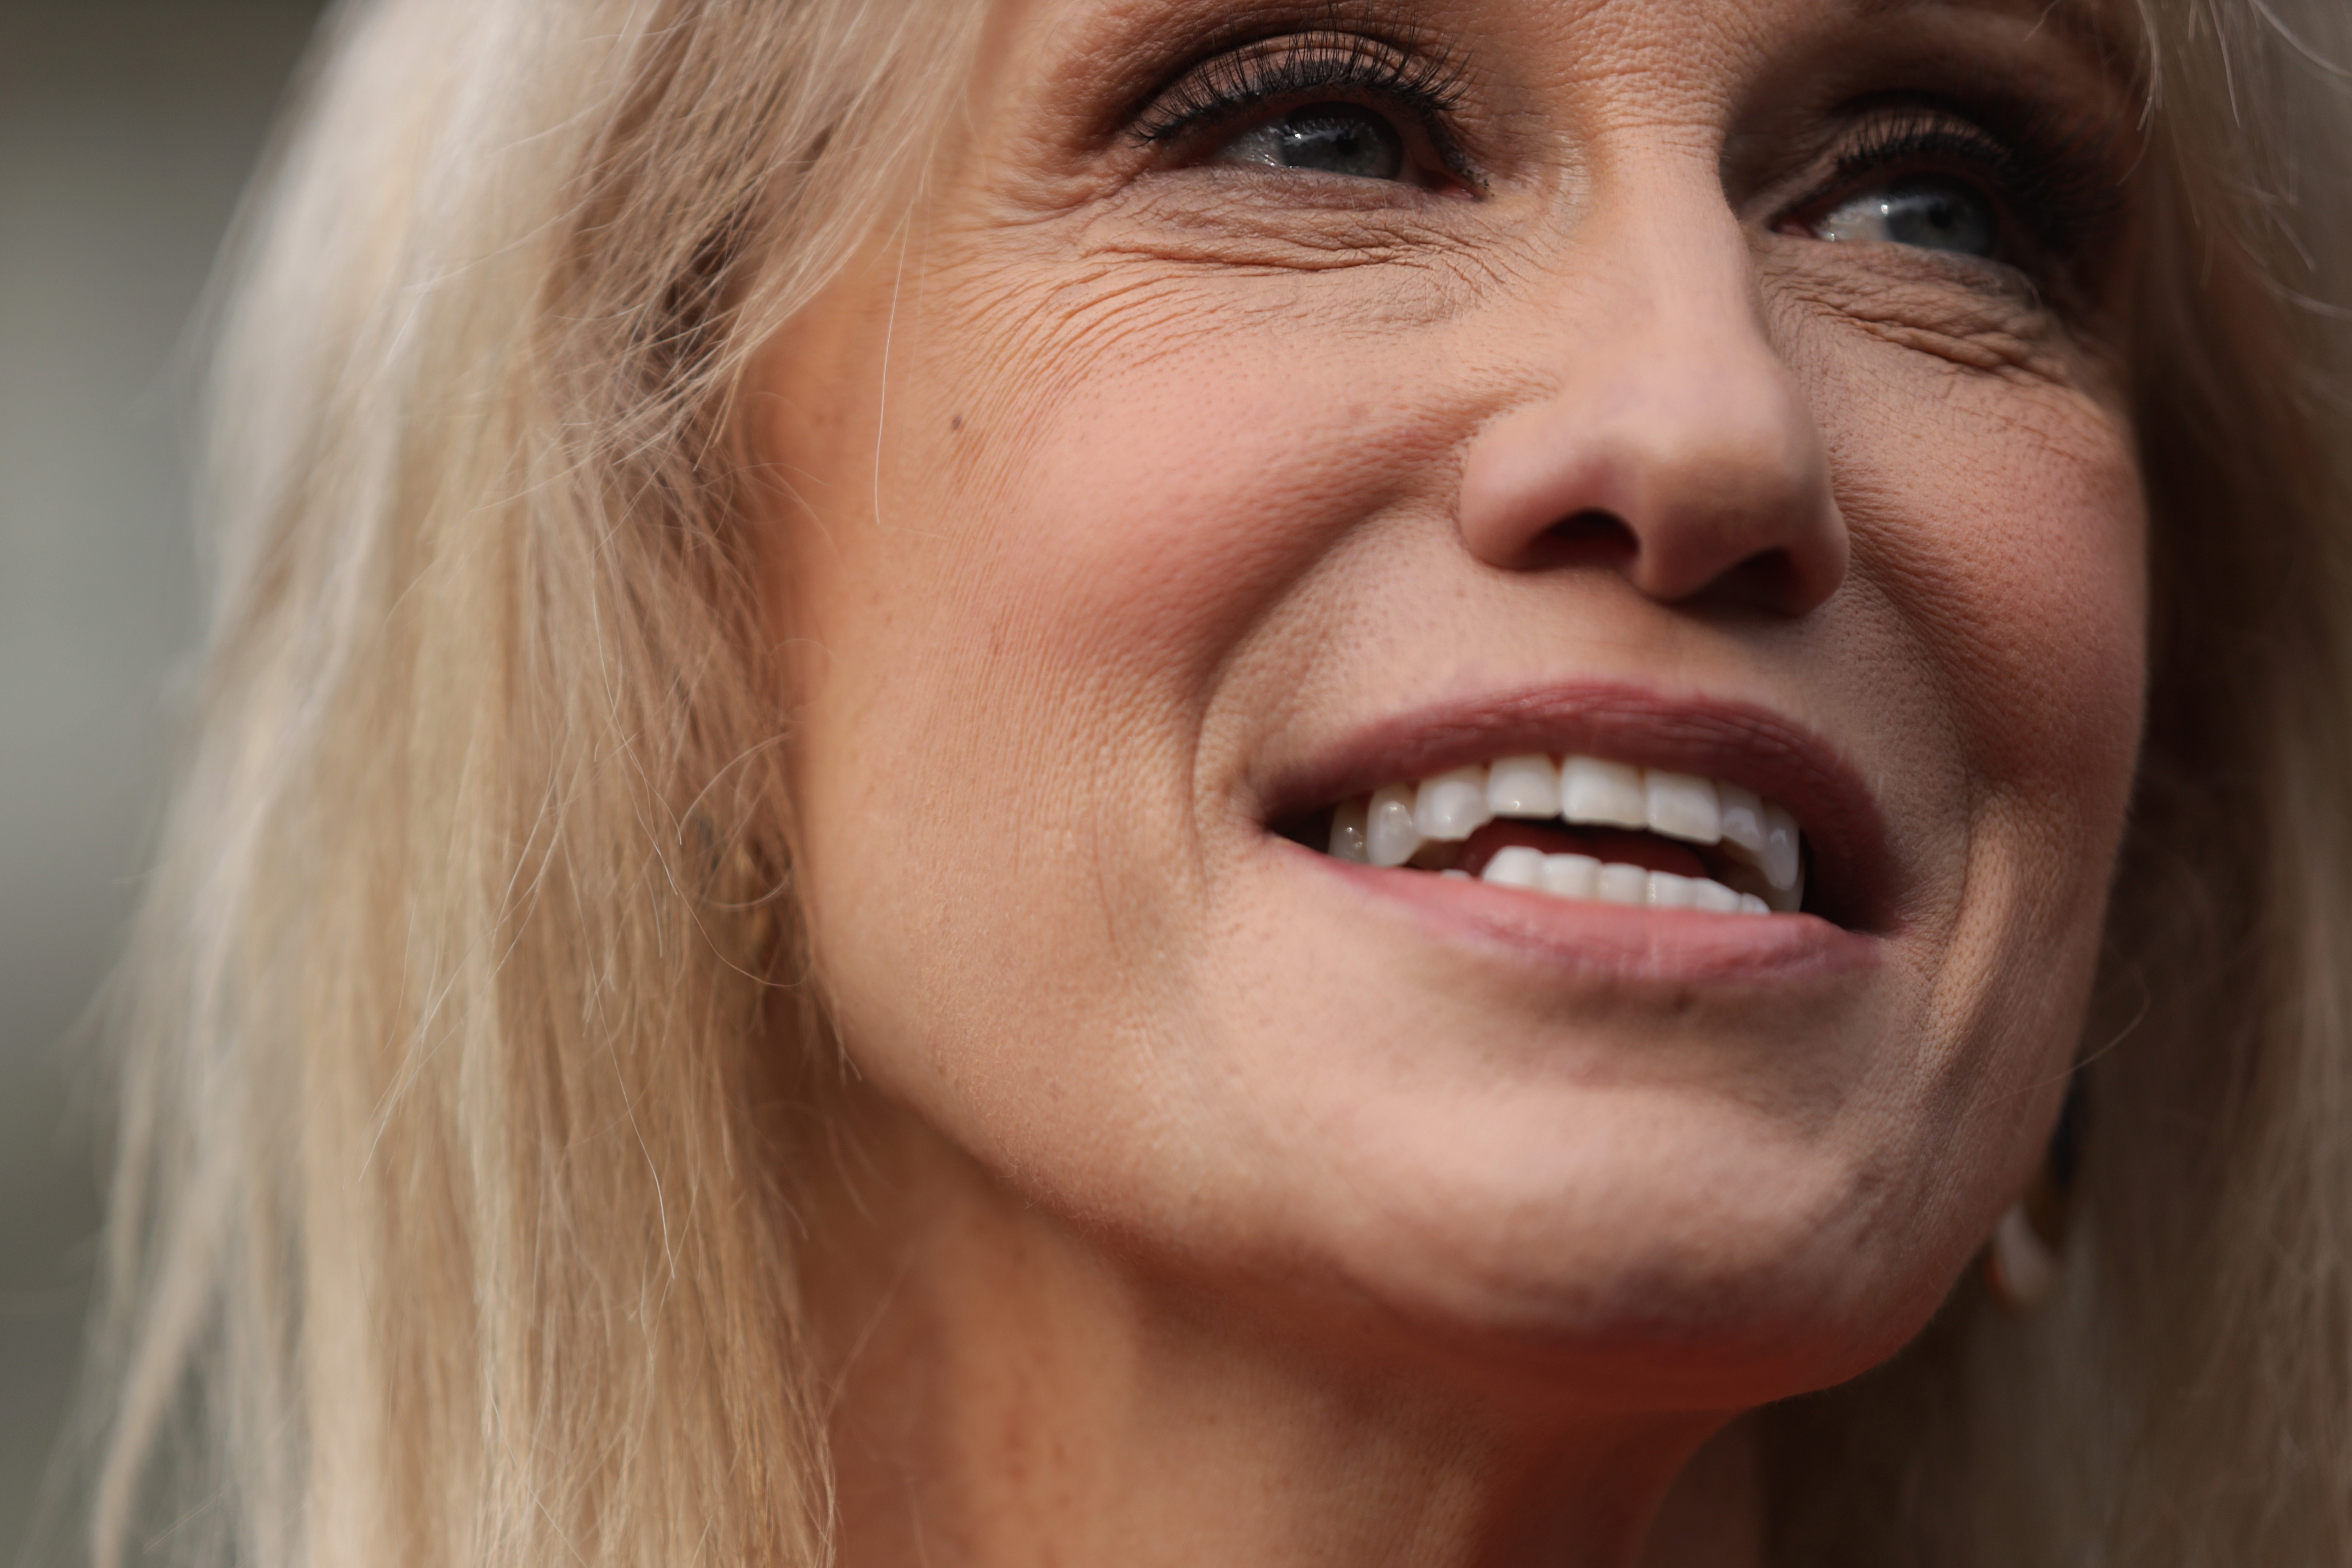 White House counselor Kellyanne Conway blasts inquiry resolution.